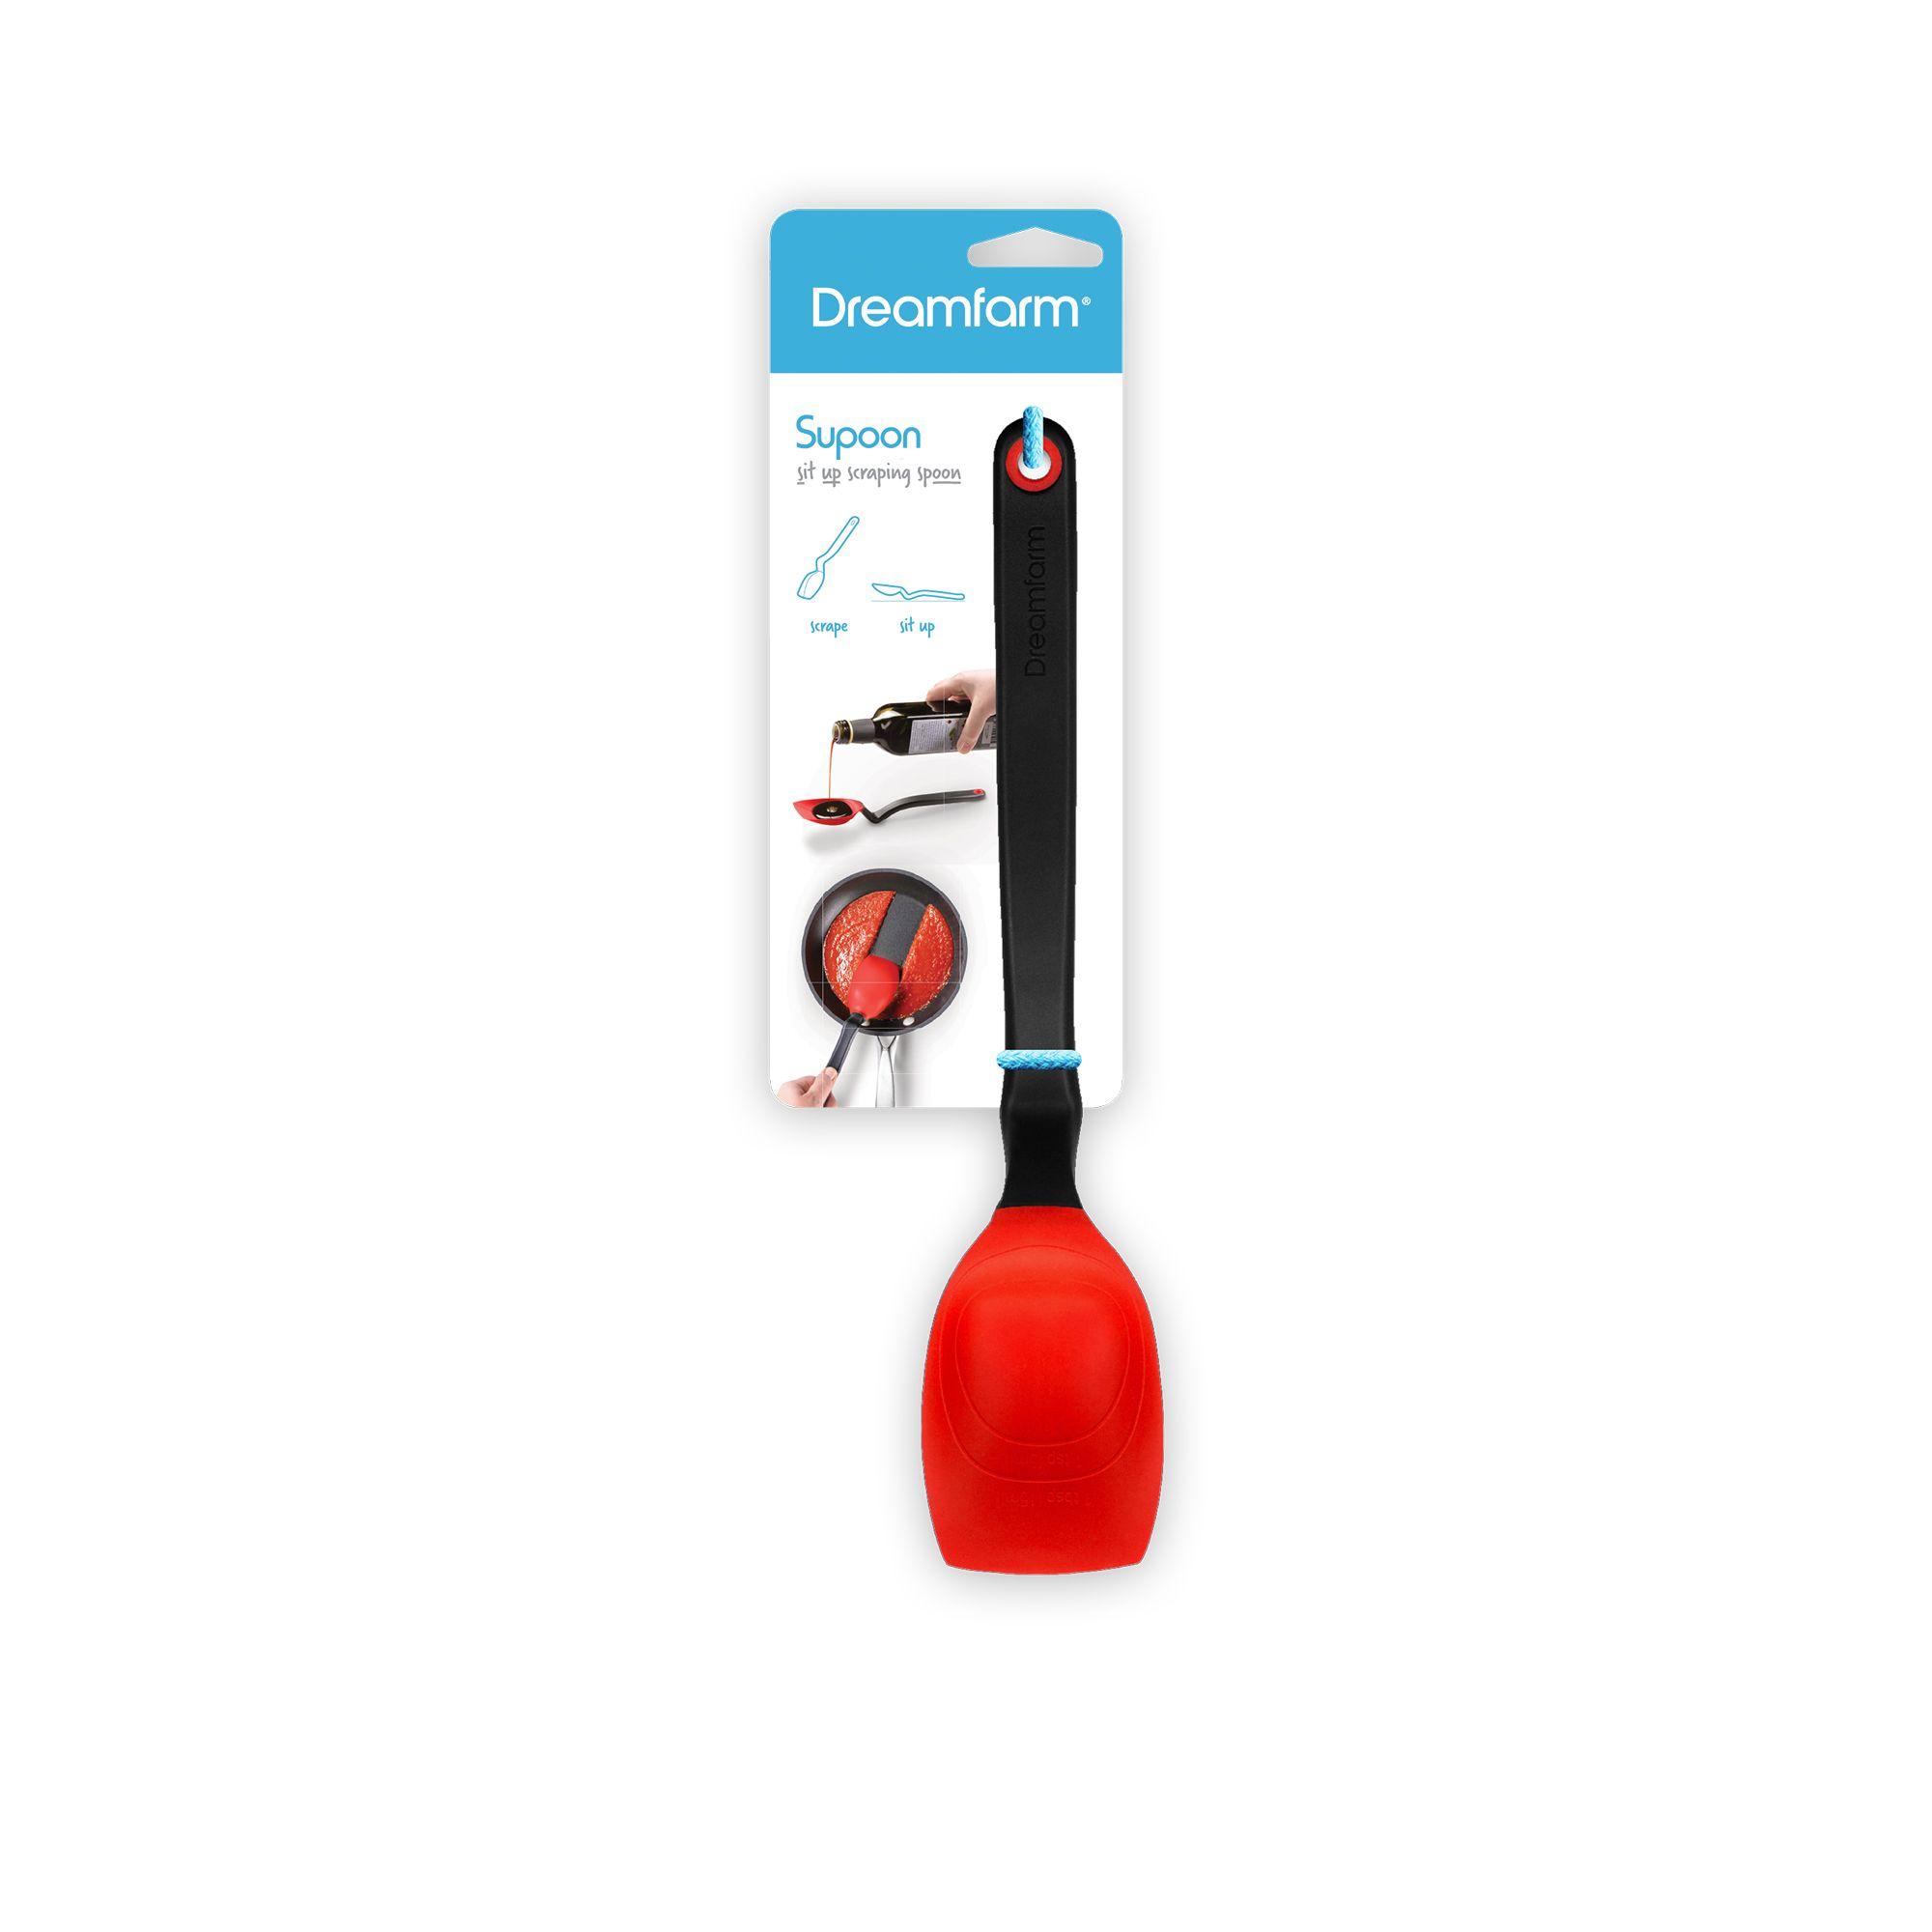 Dreamfarm Supoon Scraping Spoon Red Image 5